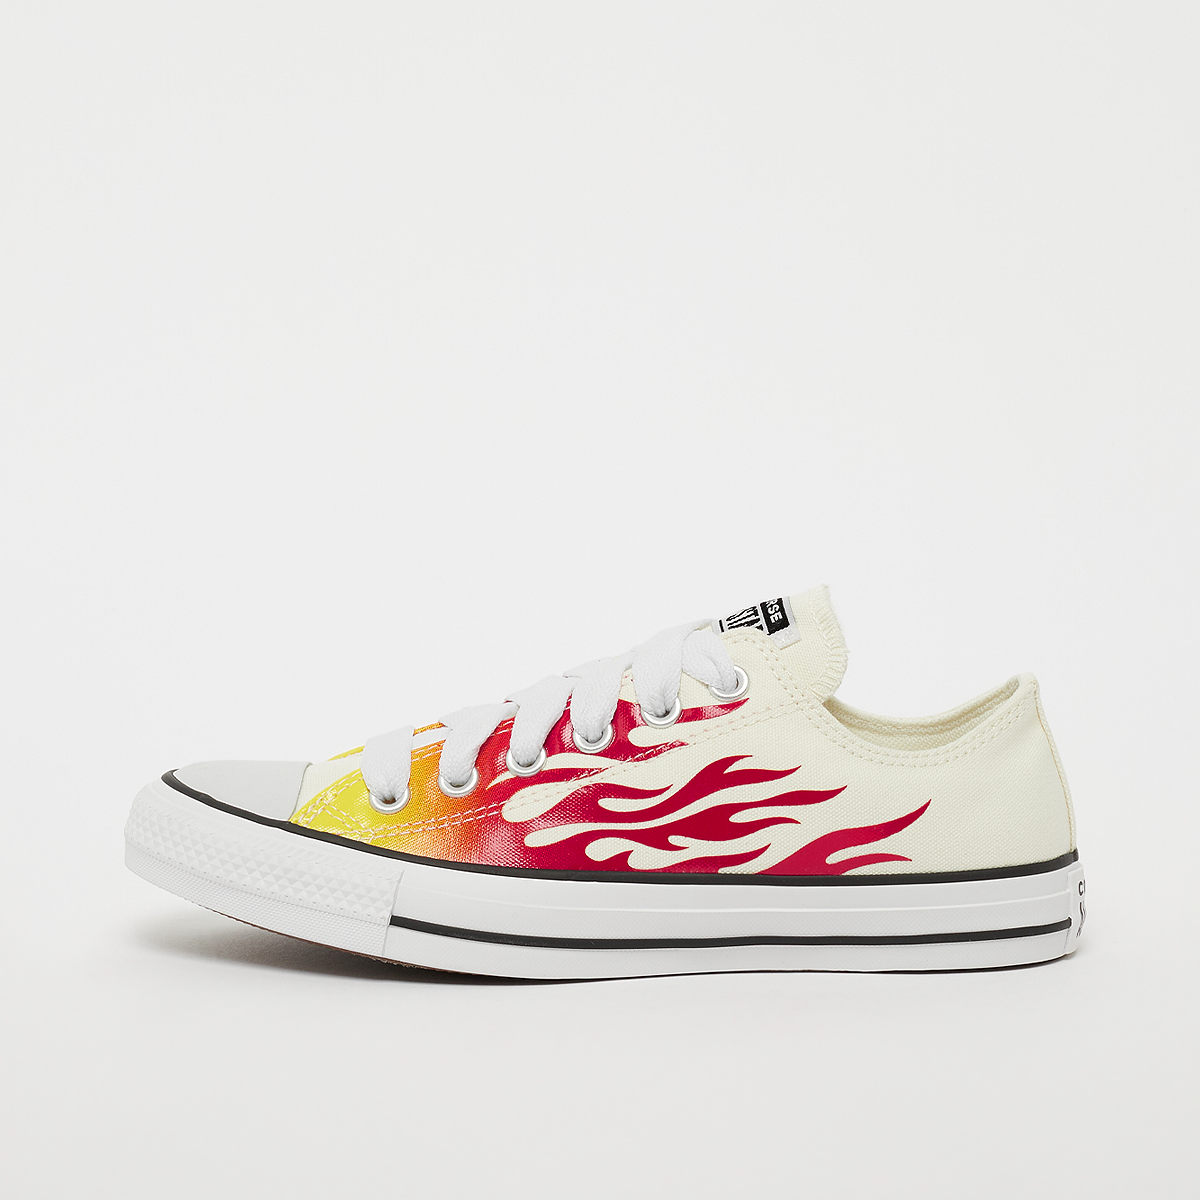 Chuck Taylor All Star, Converse, Footwear, egret/enamel red/fresh yellow, taille: 37